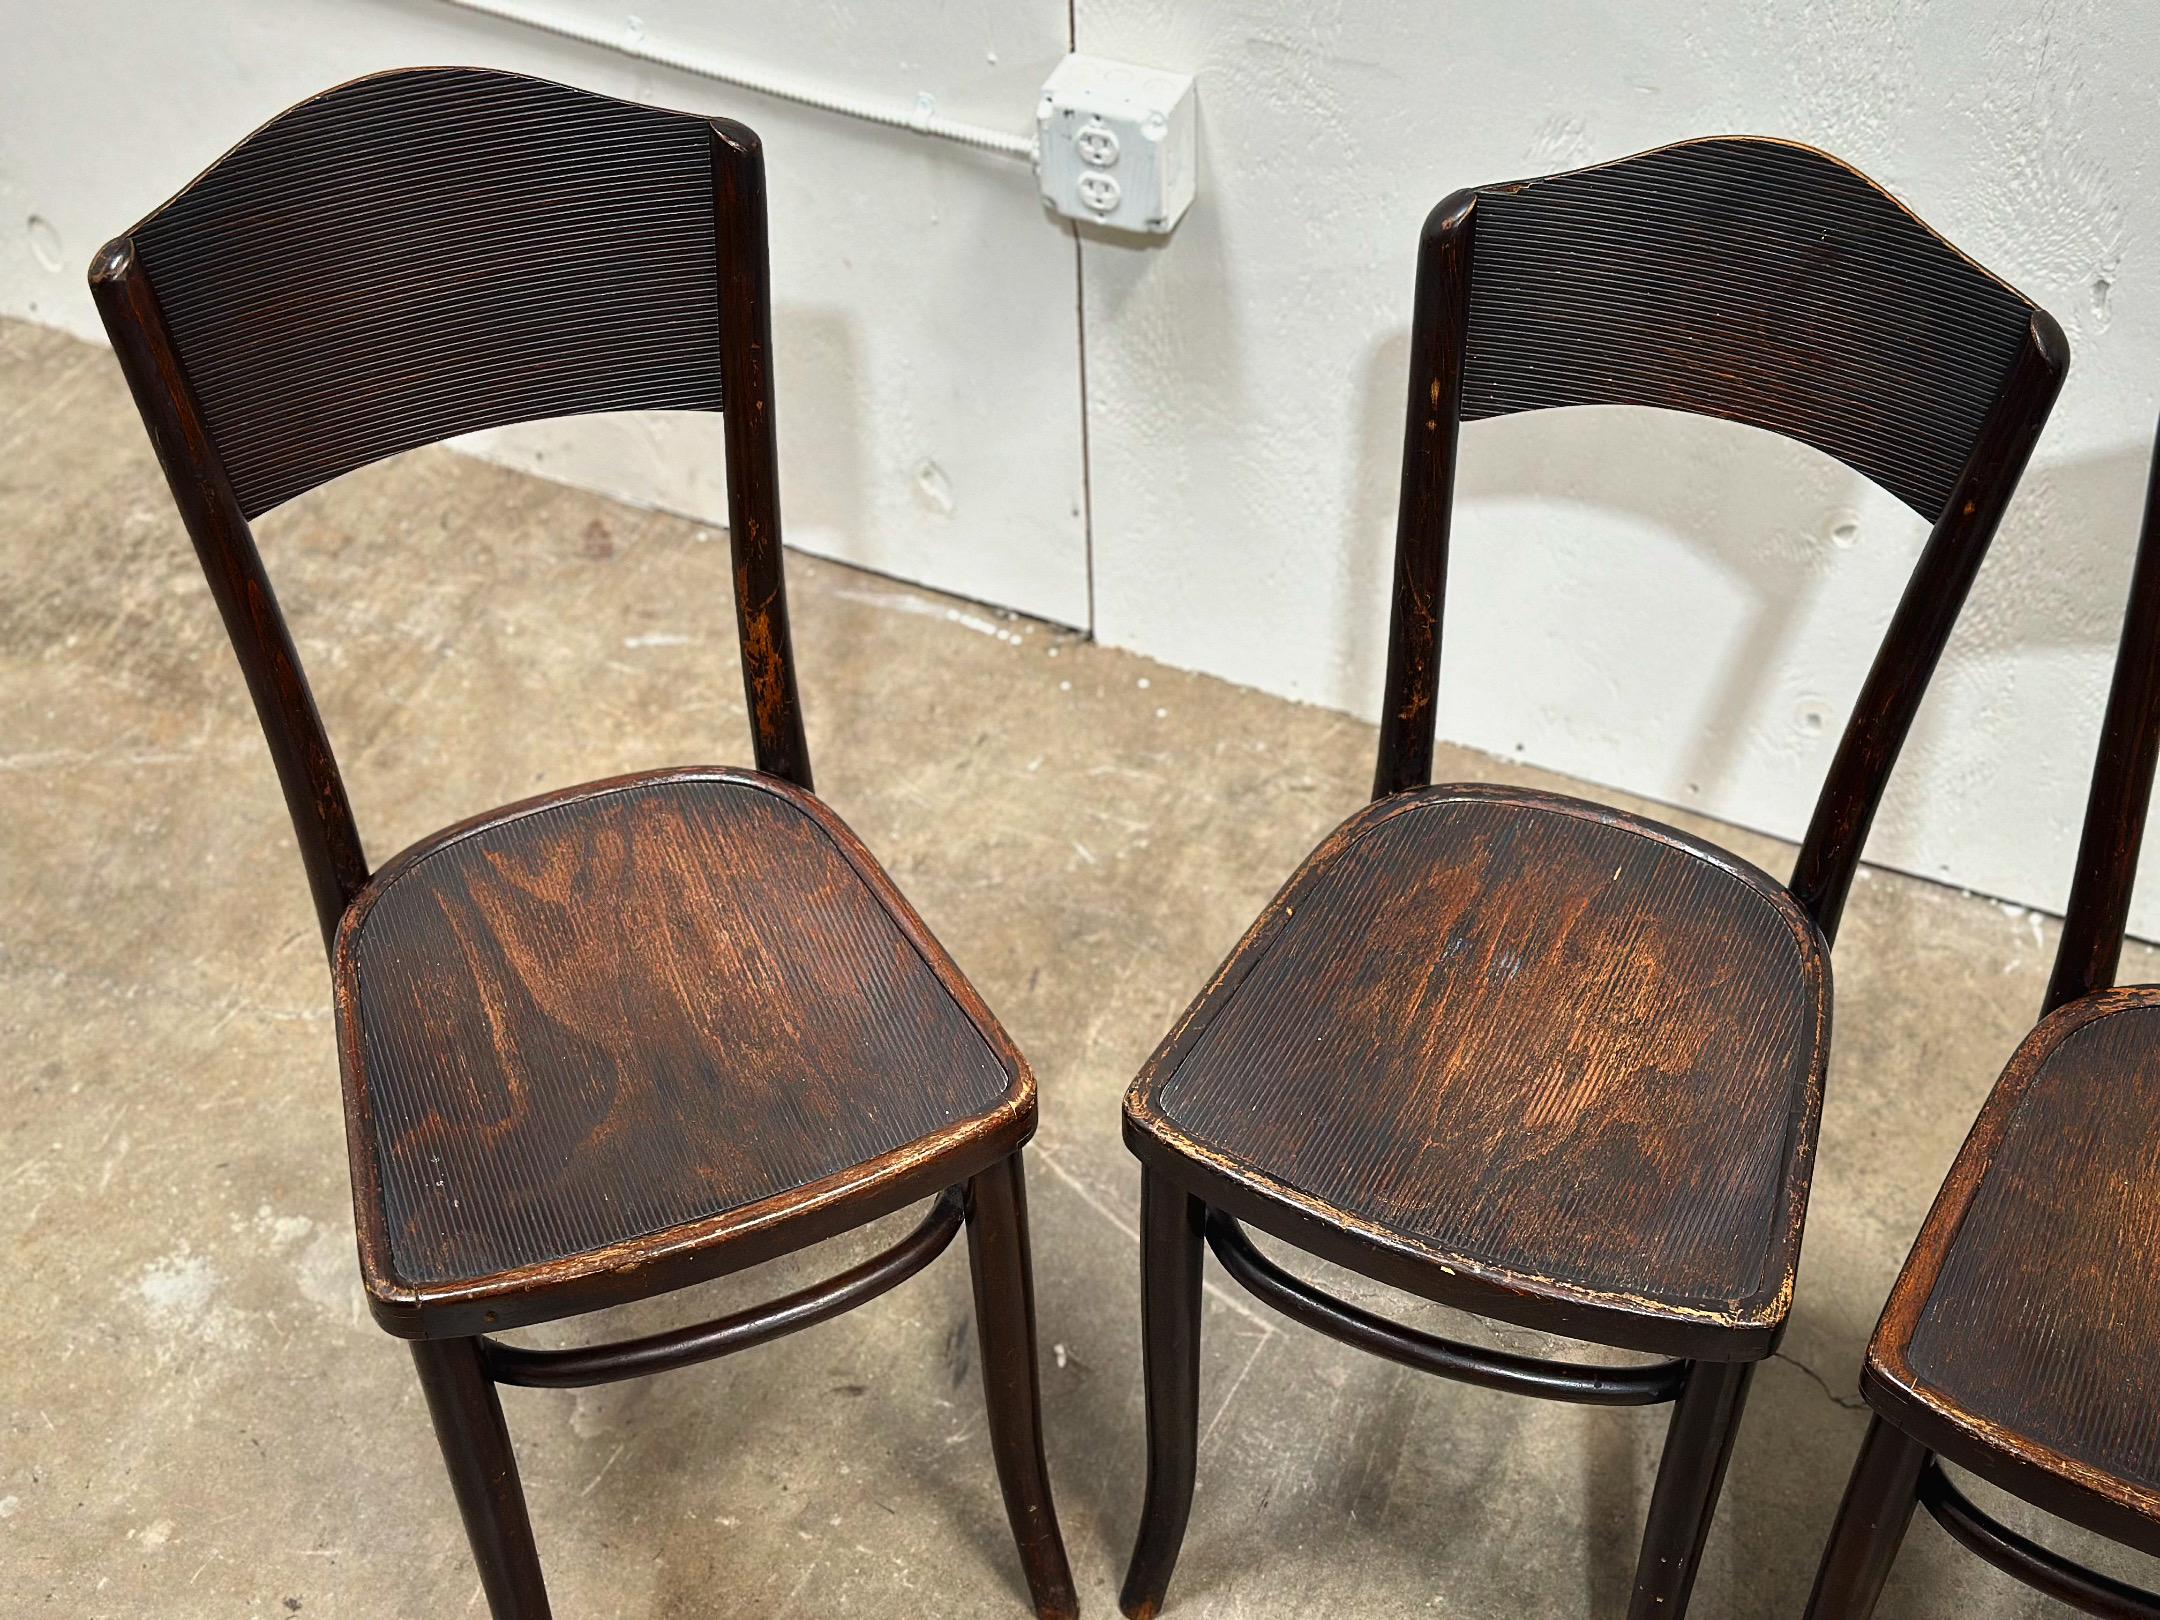 Classic chic set of four Thonet bentwood bistro or cafe chairs, circa 1930s. The chairs are constructed of steamed bent beech wood. These fine chairs are classic examples of the early roots of the modern design movement, circa 1880/ 1920. All four